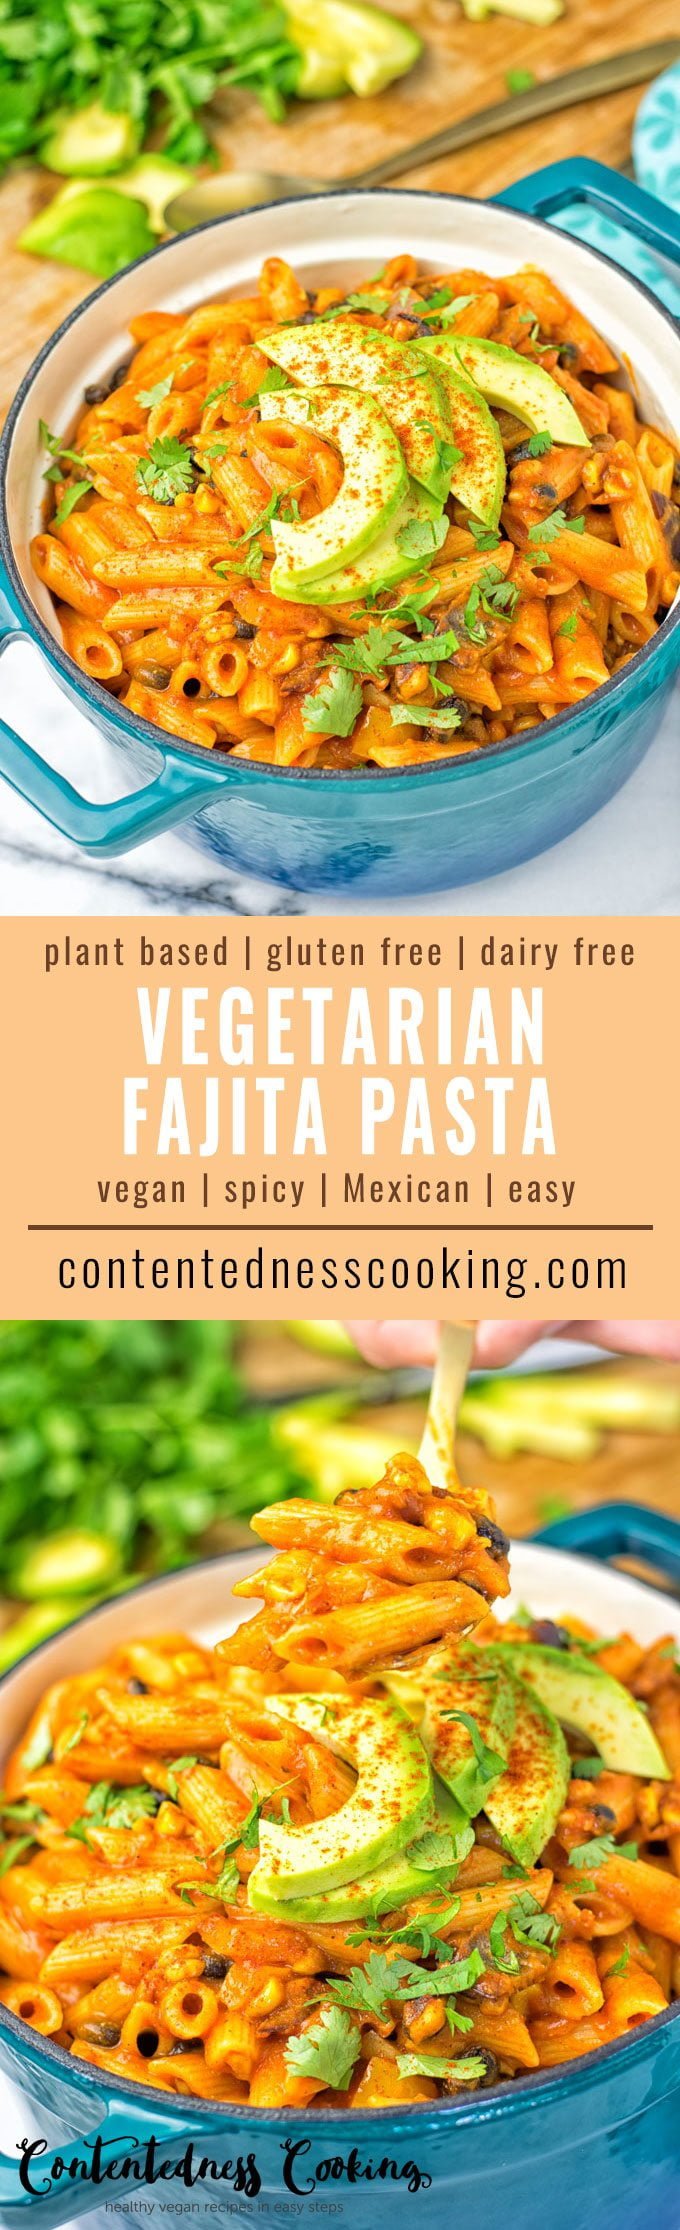 Collage of two pictures of the Vegetarian Fajita Pasta with recipe title text.